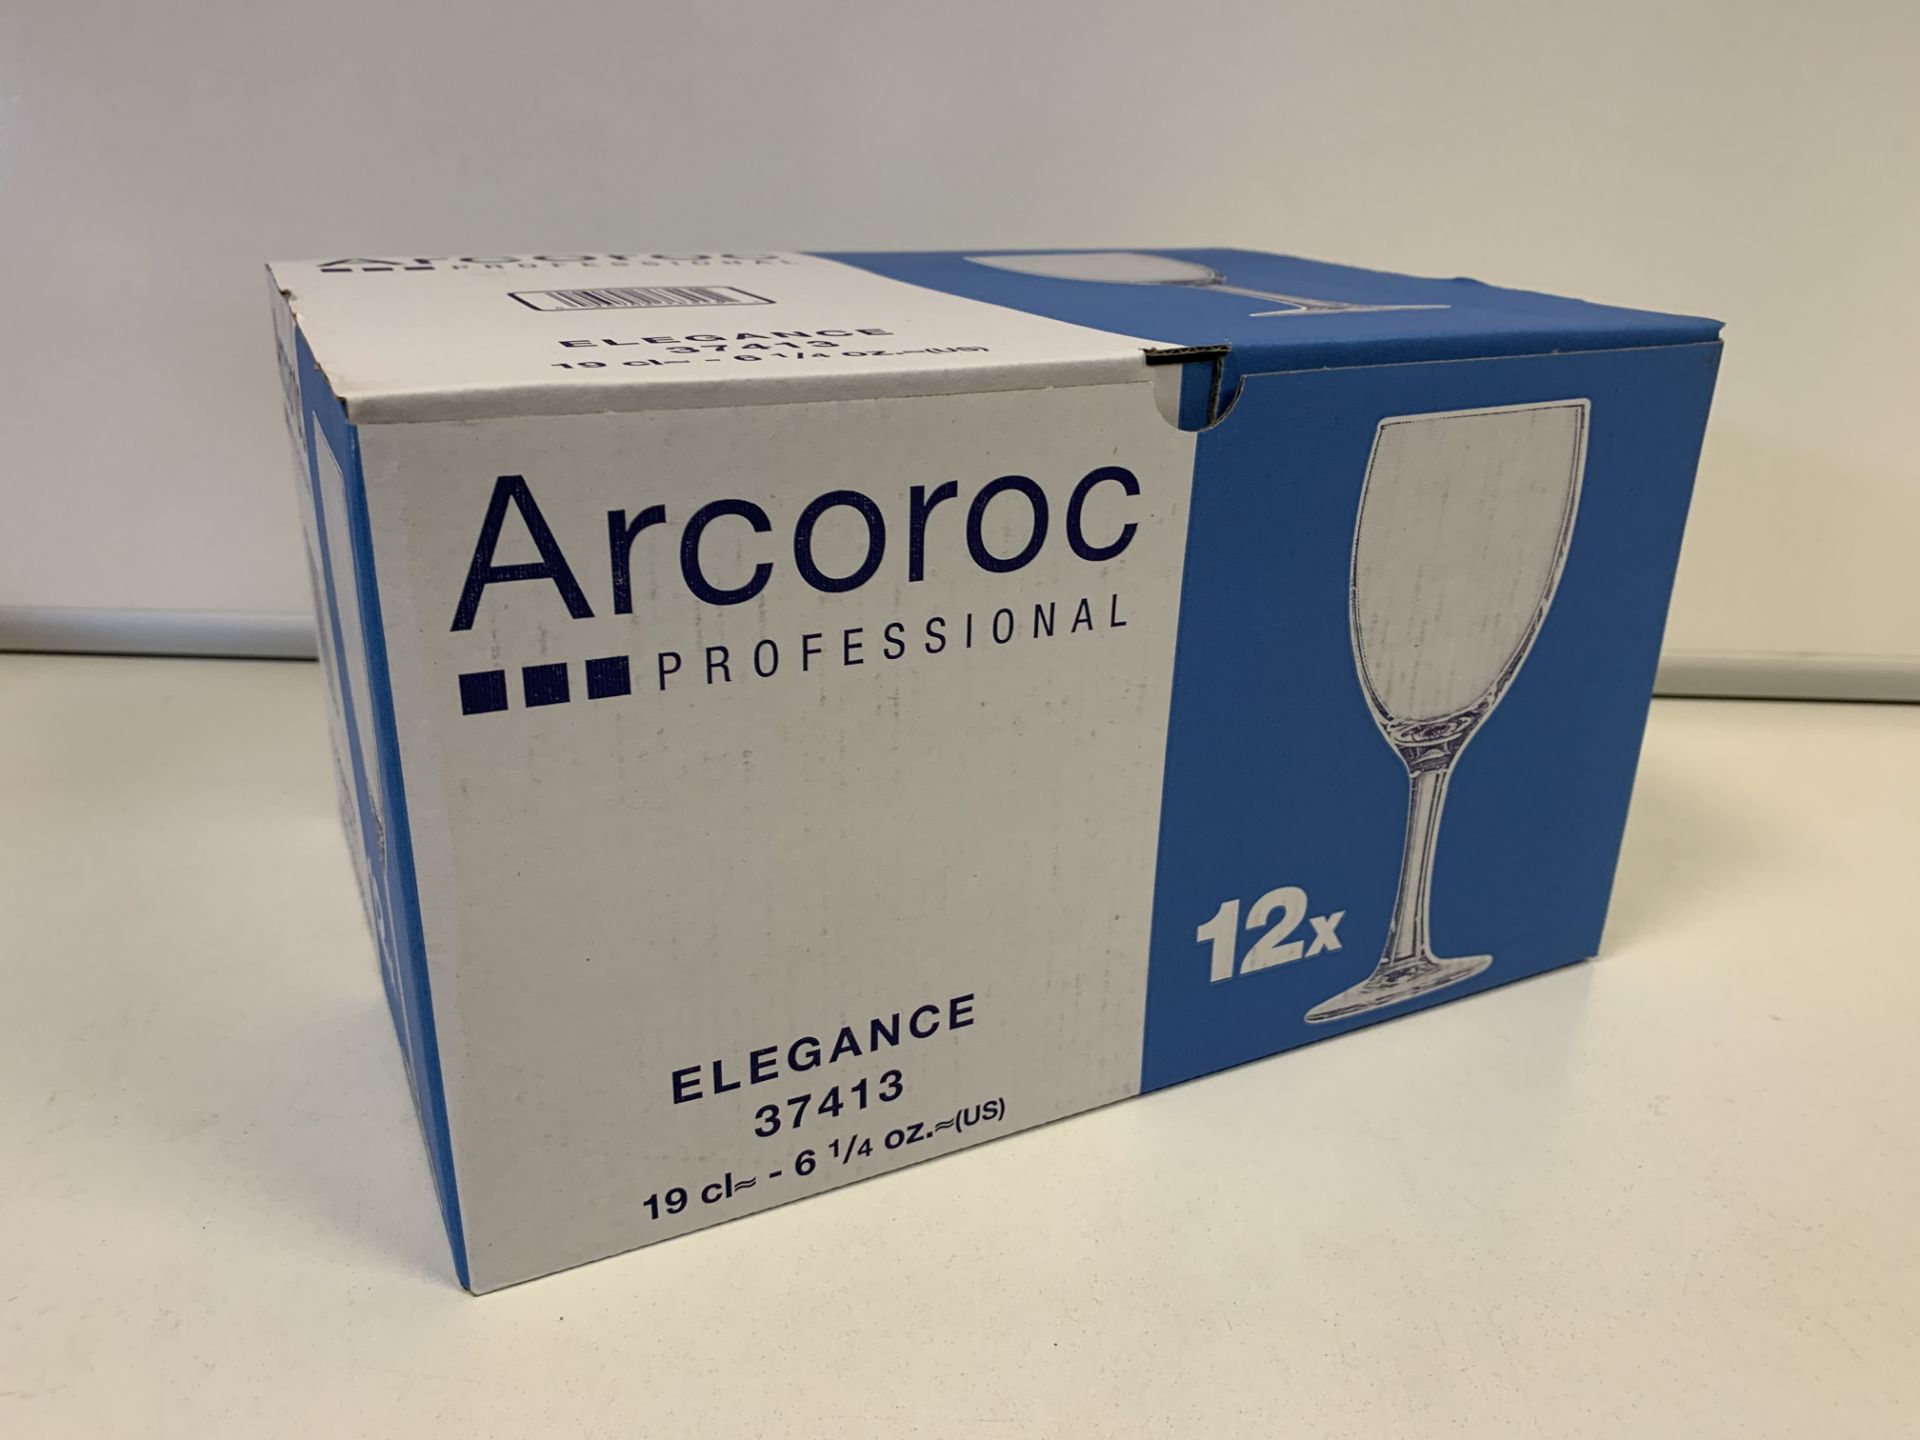 144 X ARCOROC PROFESSIONAL 19CL ELEGANCE STEMGLASS GLASSES IN 3 BOXES